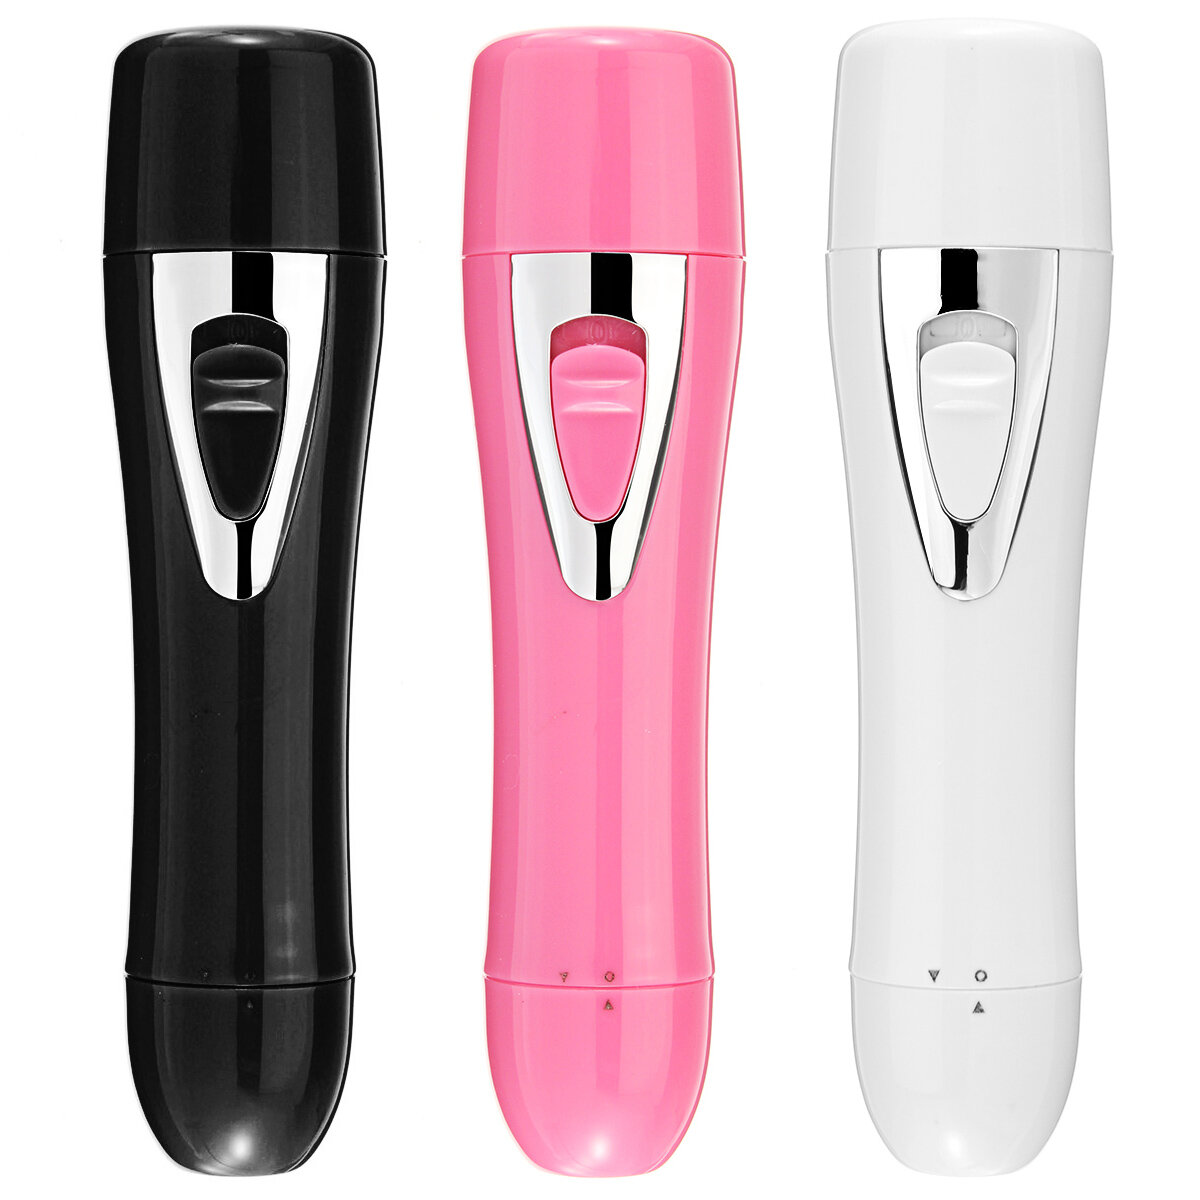 

Rechargeable 2-in-1 Electric Shaver, Pink